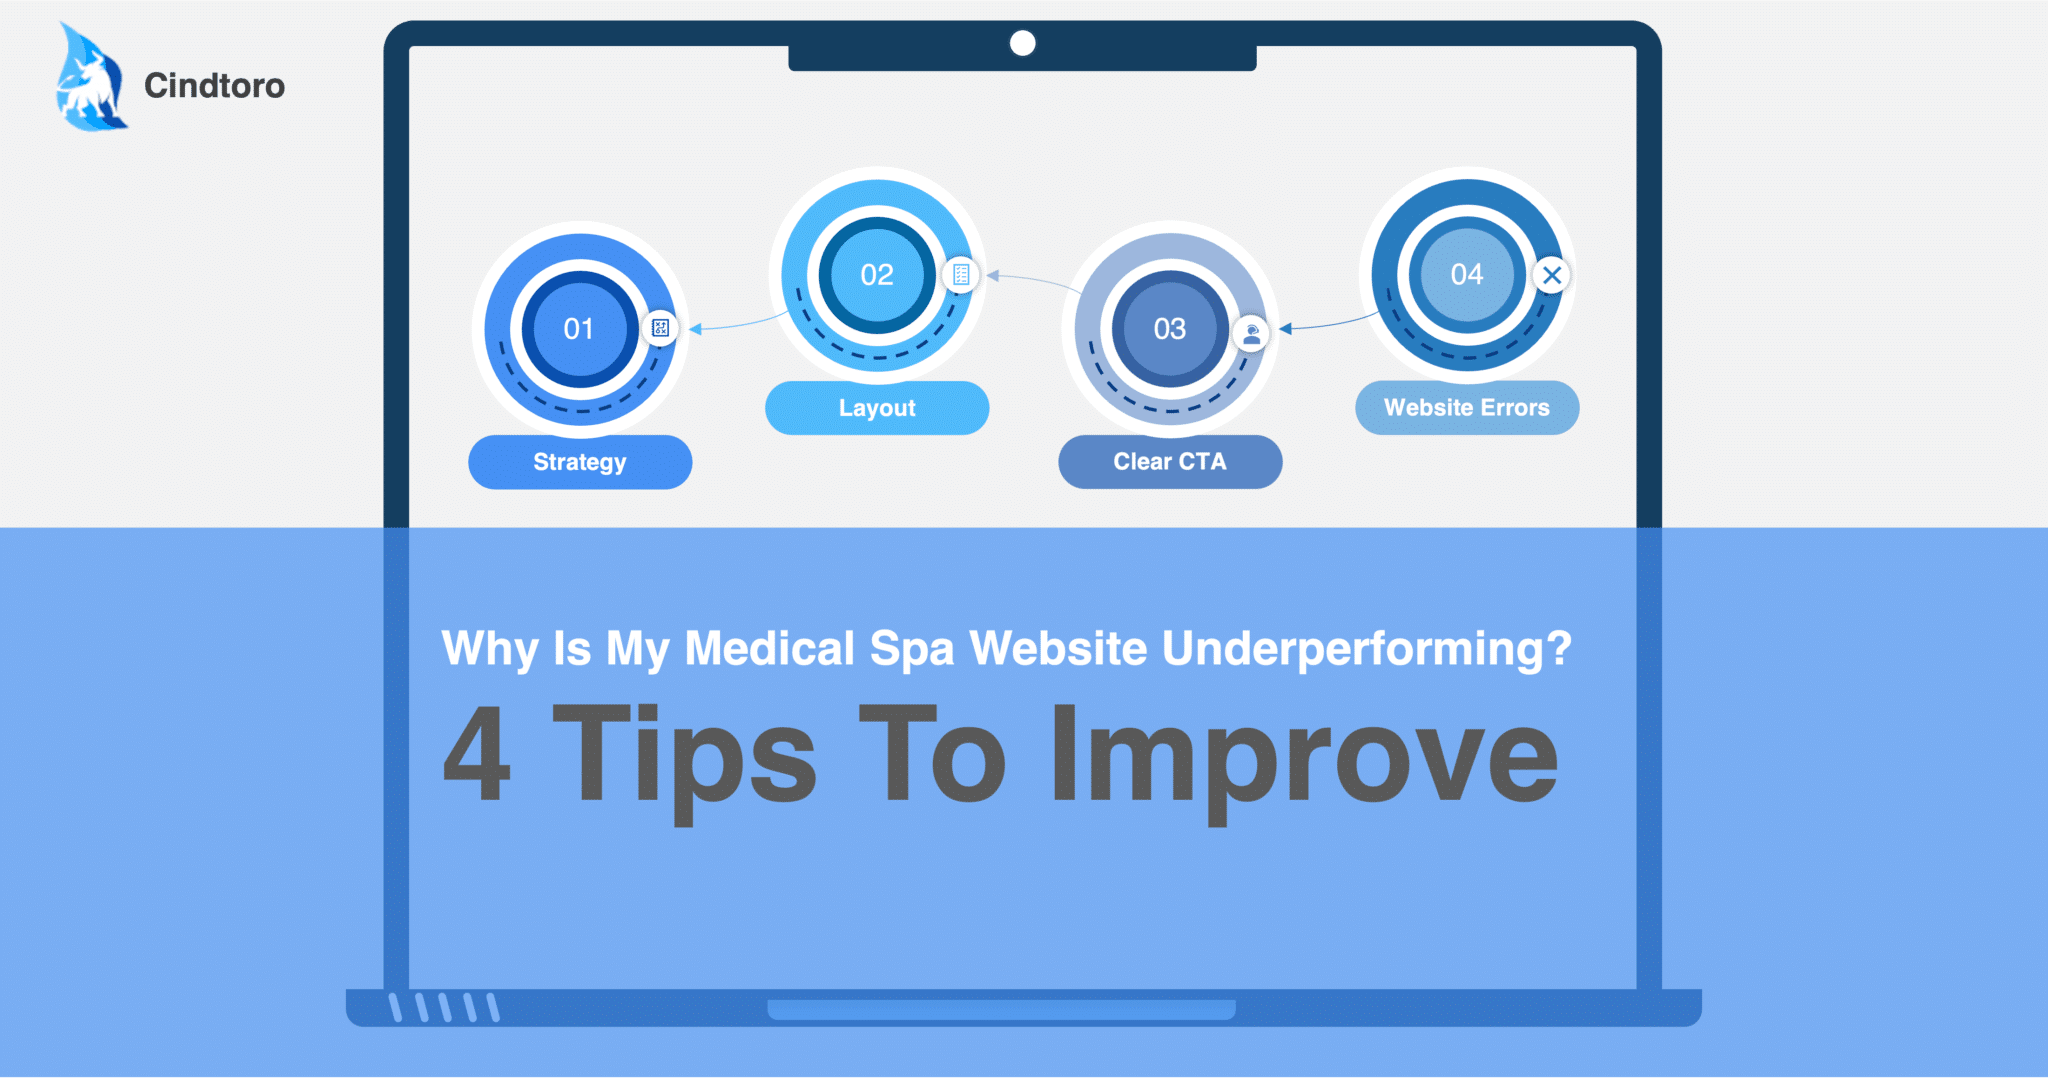 Learn the four tips to improve the traffic to your med spas website. Gain new patients for the products and services that your spa offers. These four steps will help you improve your websites traffic, leads and sales!